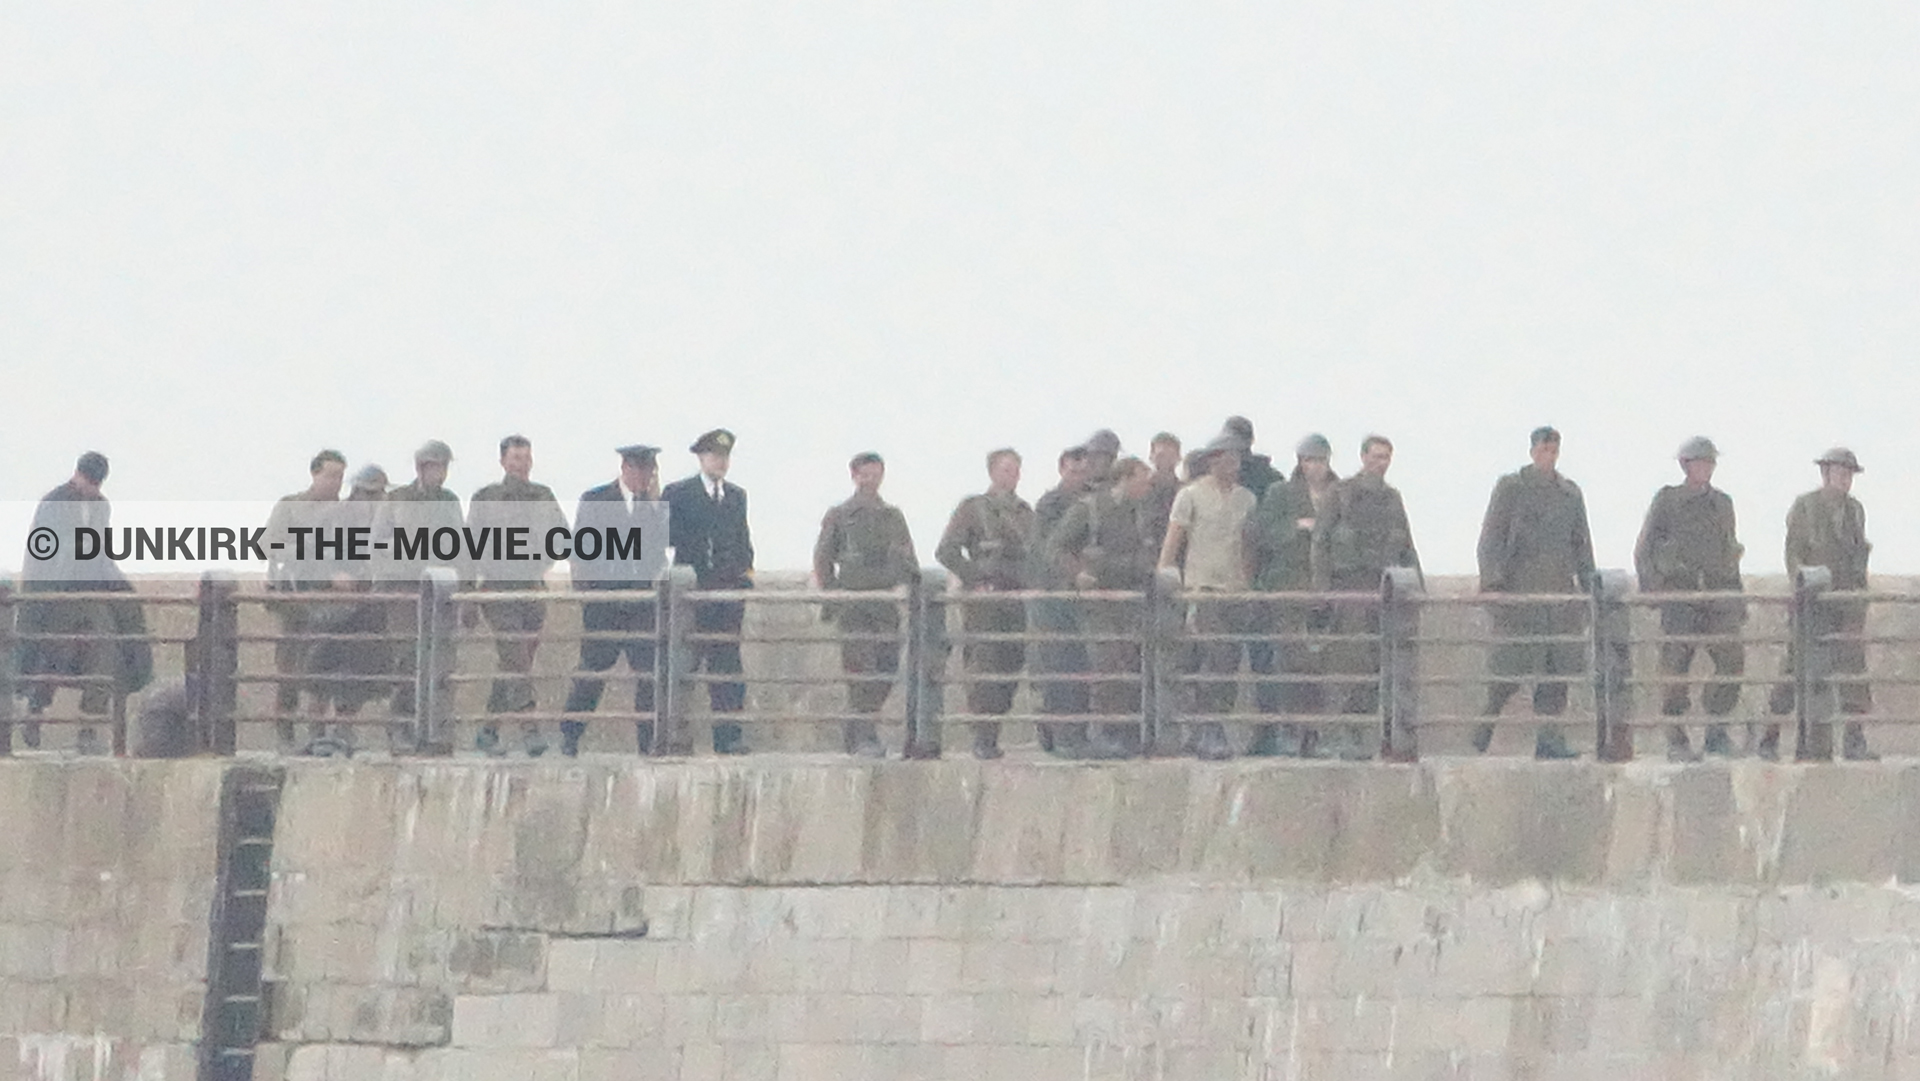 Picture with actor, grey sky, supernumeraries, EST pier, Kenneth Branagh,  from behind the scene of the Dunkirk movie by Nolan